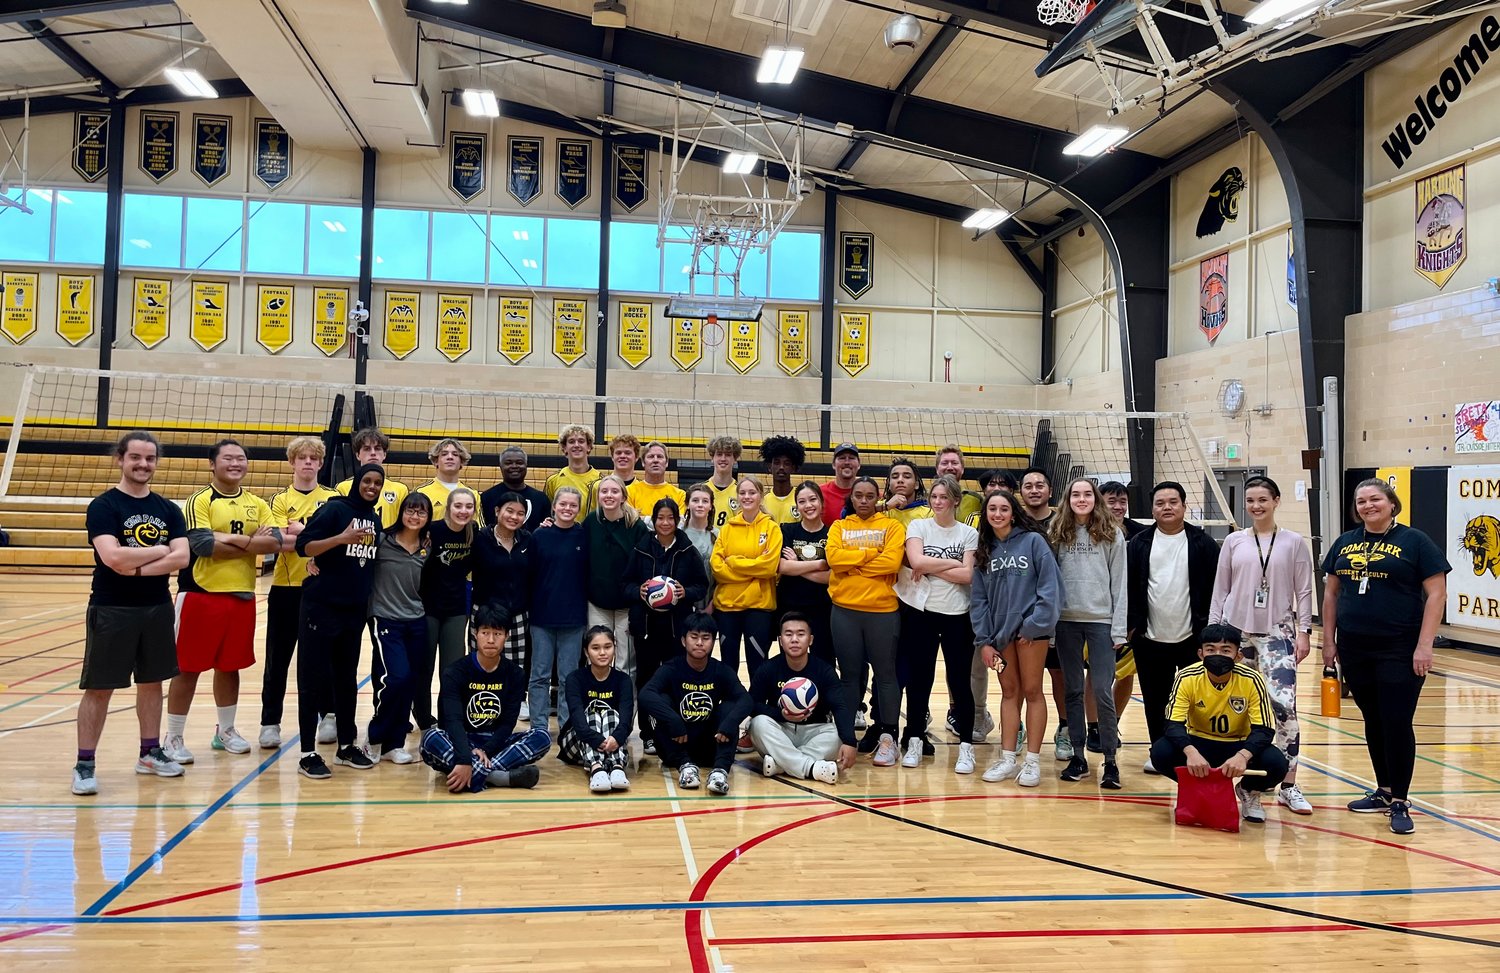 Como students and staff posed together after competing in a friendly volleyball tournament. (Photo by Diego Guevara)